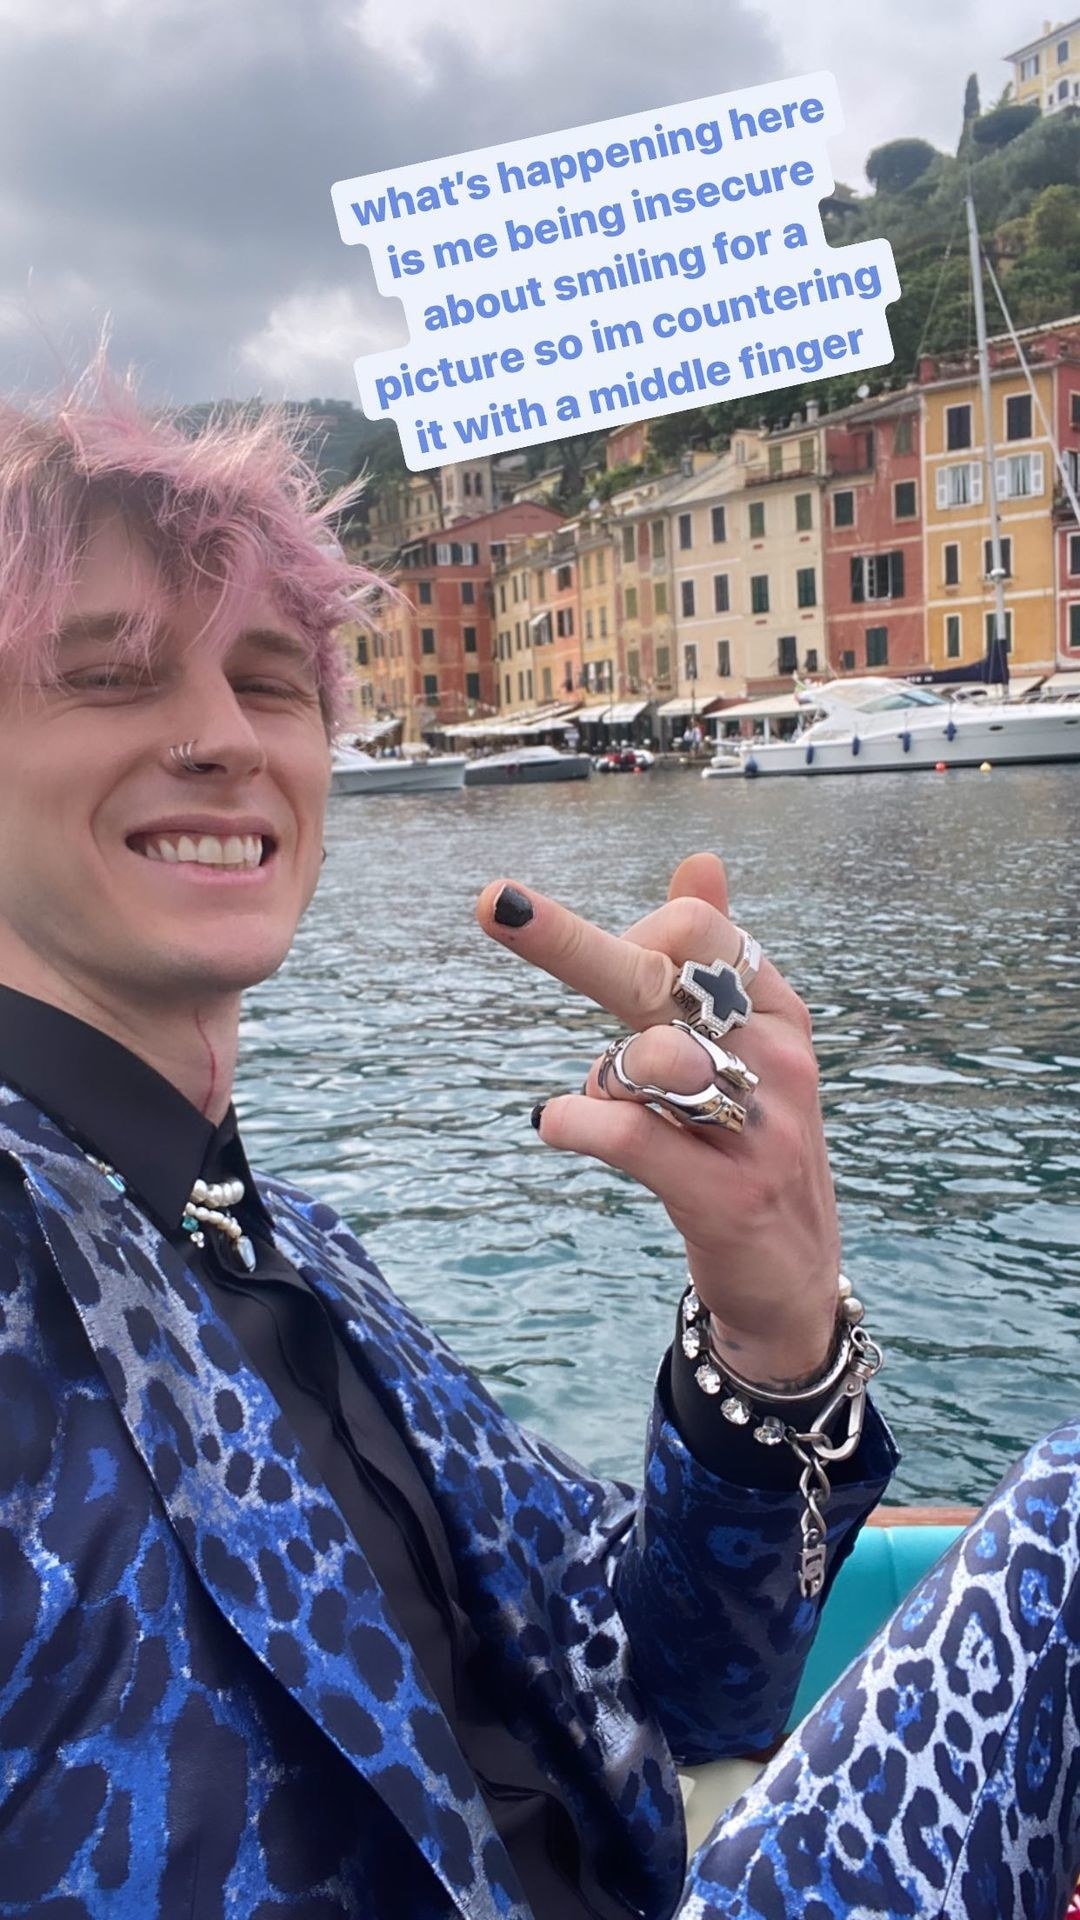 MGK smiling for a picture while holding up his middle finger, with a caption saying he&#x27;s doing it because he feels insecure